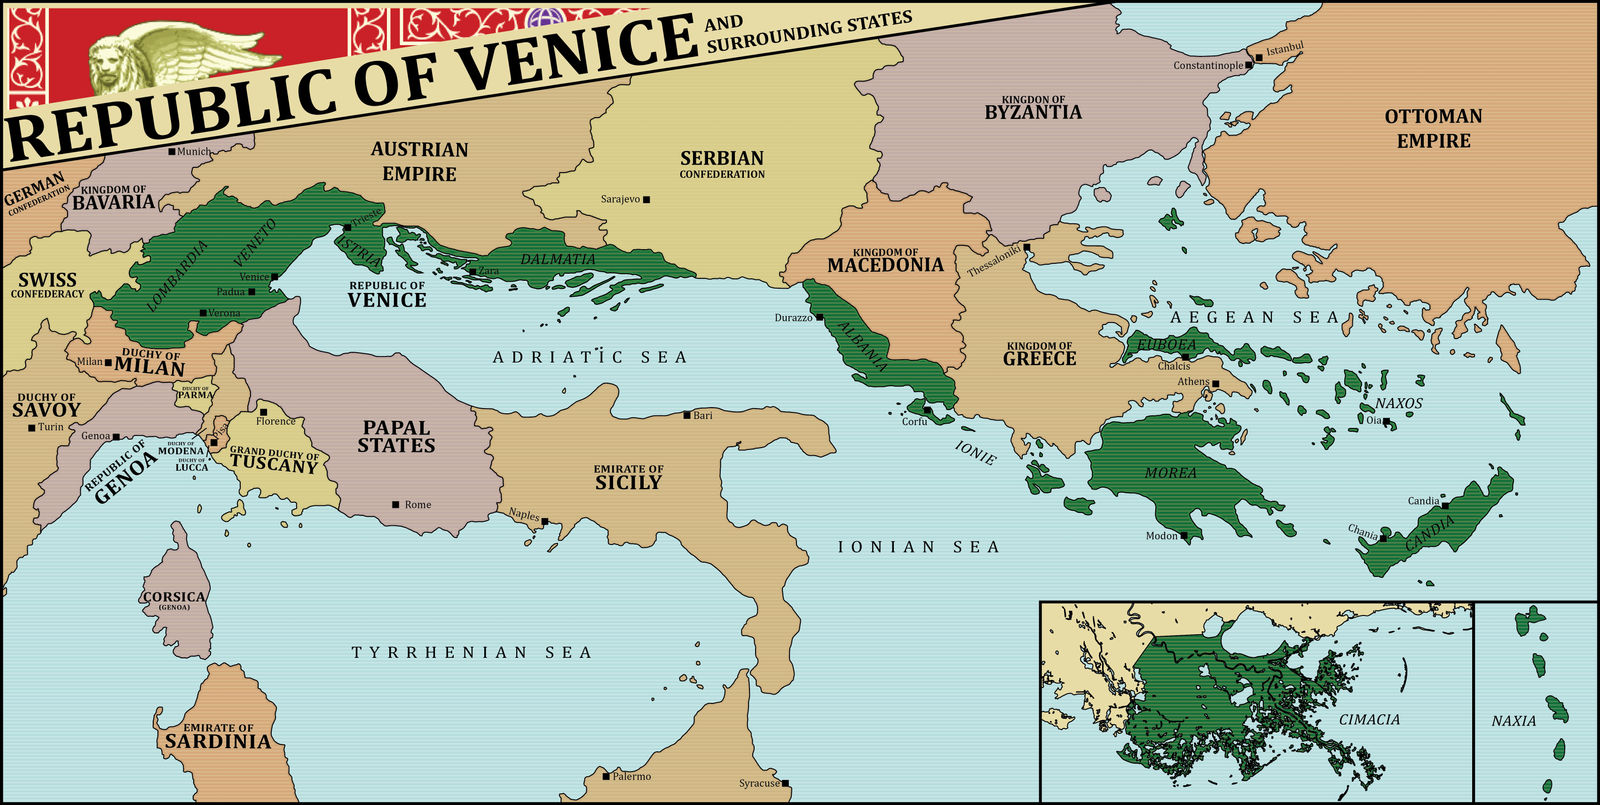 republic_of_venice_by_courageouslife_dcb7dve-fullview.jpg